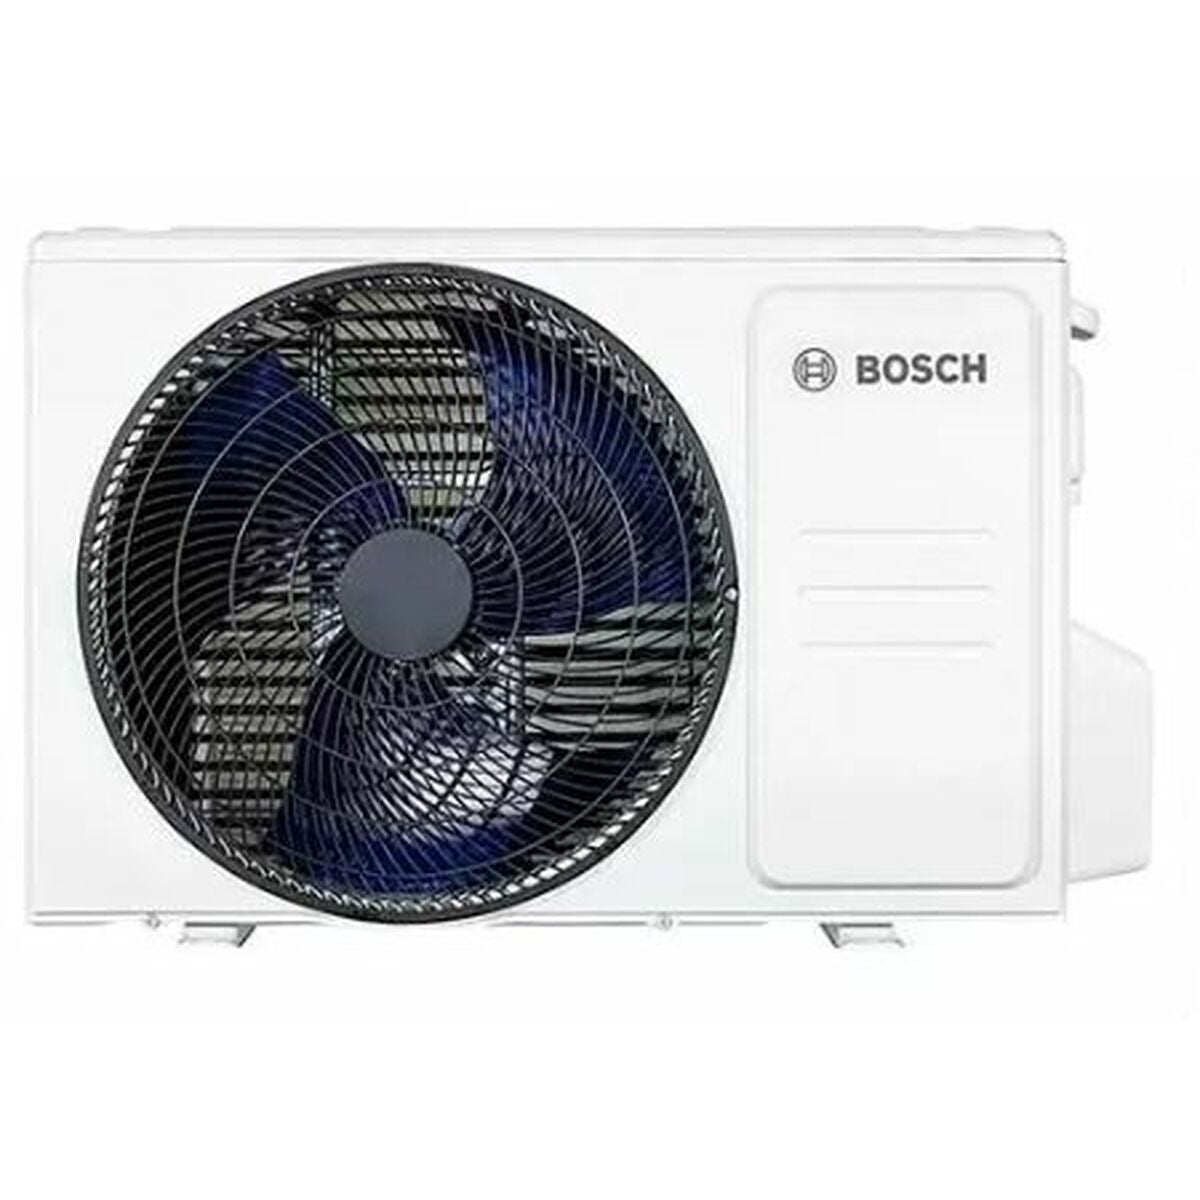 Air Conditioning BOSCH CLIMATE 2000, BOSCH, Home and cooking, Portable air conditioning, air-conditioning-bosch-climate-2000, Brand_BOSCH, category-reference-2399, category-reference-2450, category-reference-2451, category-reference-t-19656, category-reference-t-21087, category-reference-t-25214, category-reference-t-29111, Condition_NEW, ferretería, Price_500 - 600, summer, RiotNook